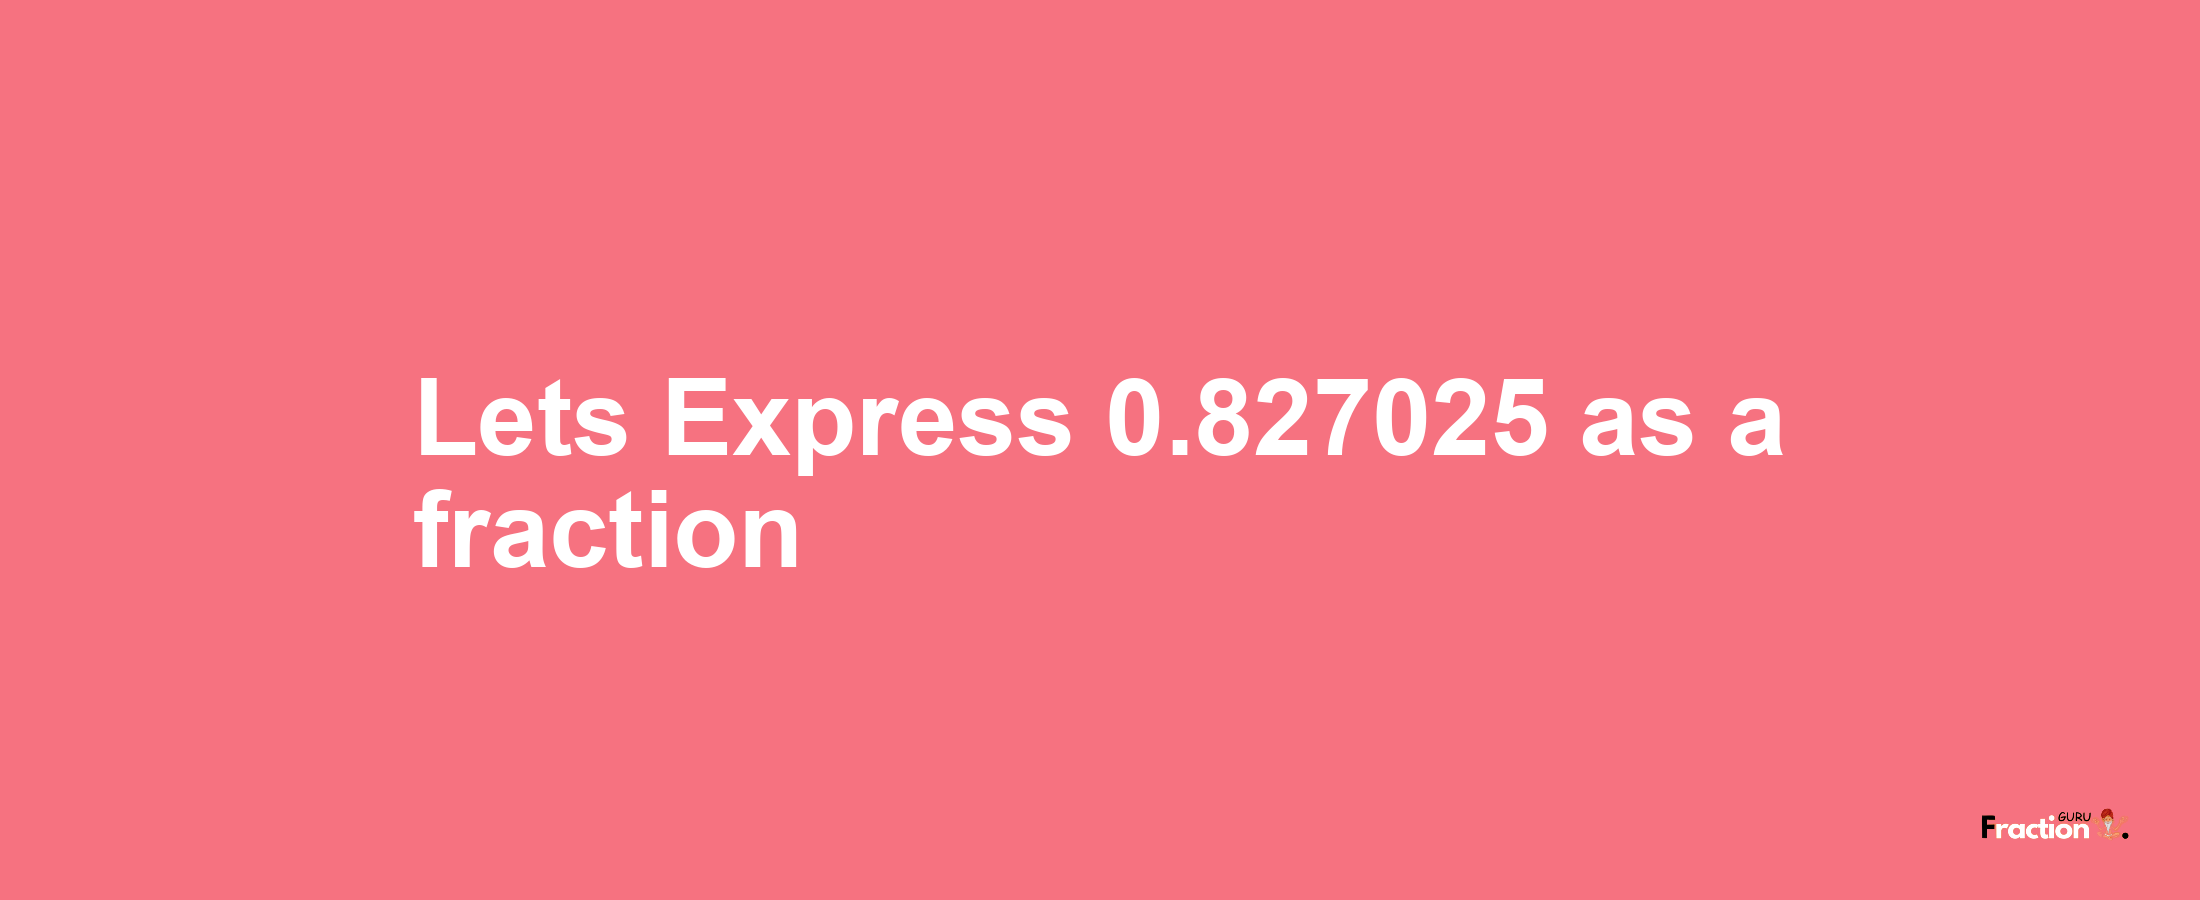 Lets Express 0.827025 as afraction